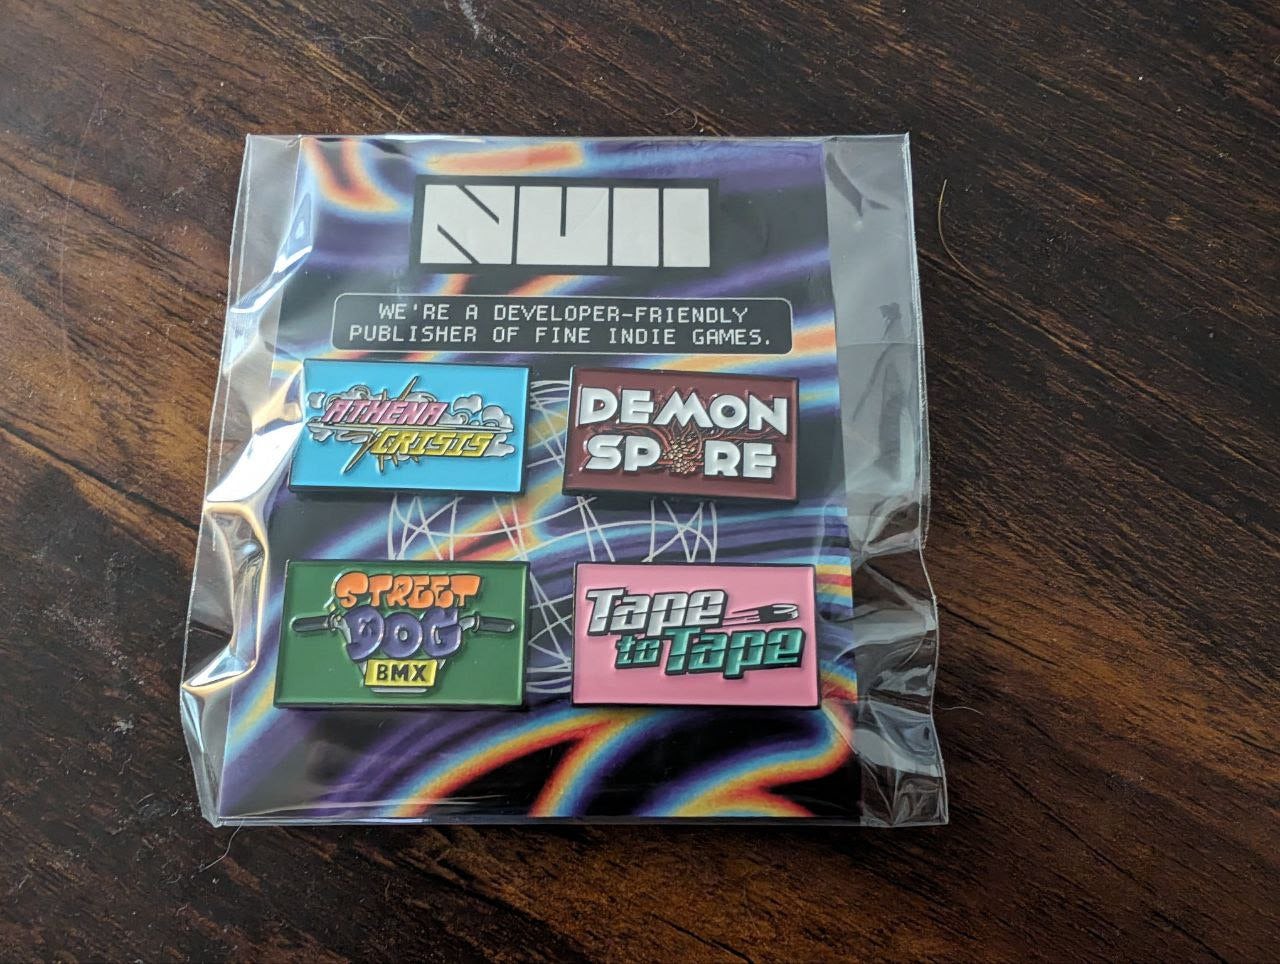 An image of pins that were created for PAX East